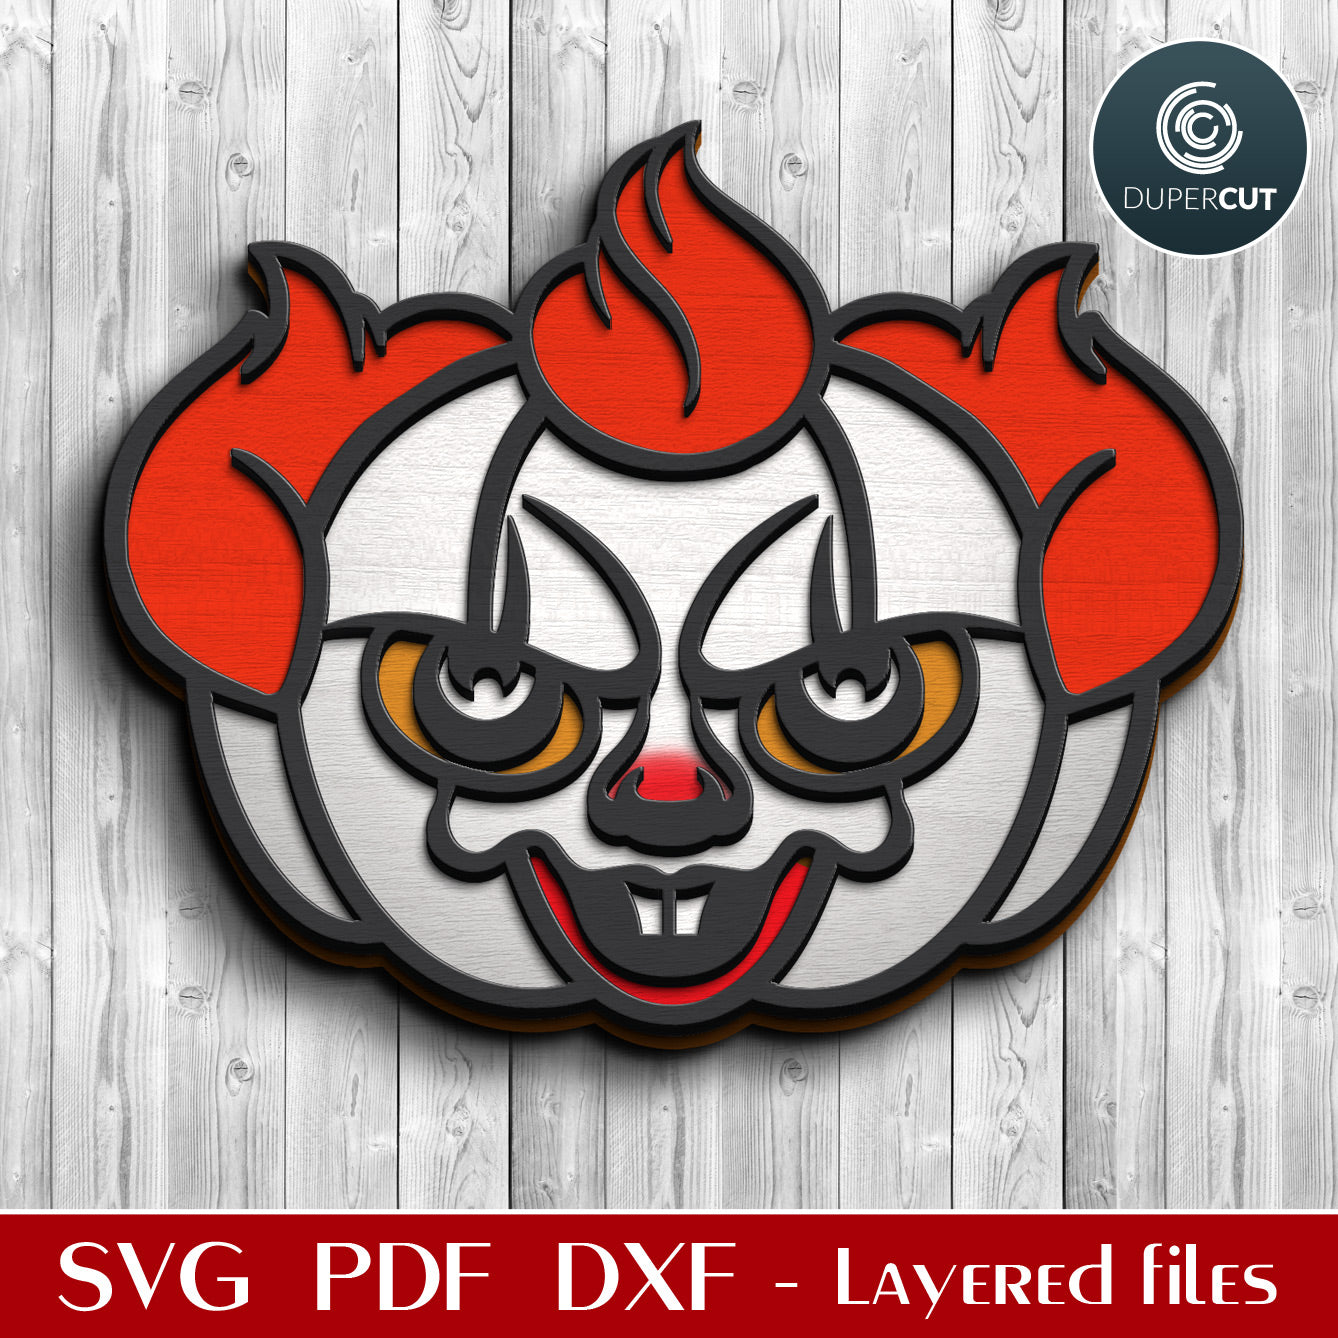 Pumpkin Pennywise Halloween decoration - SVG DXF vector layered files for laser Glowforge, Cricut, X-tool, CNC plasma machines by www.DuperCut.com